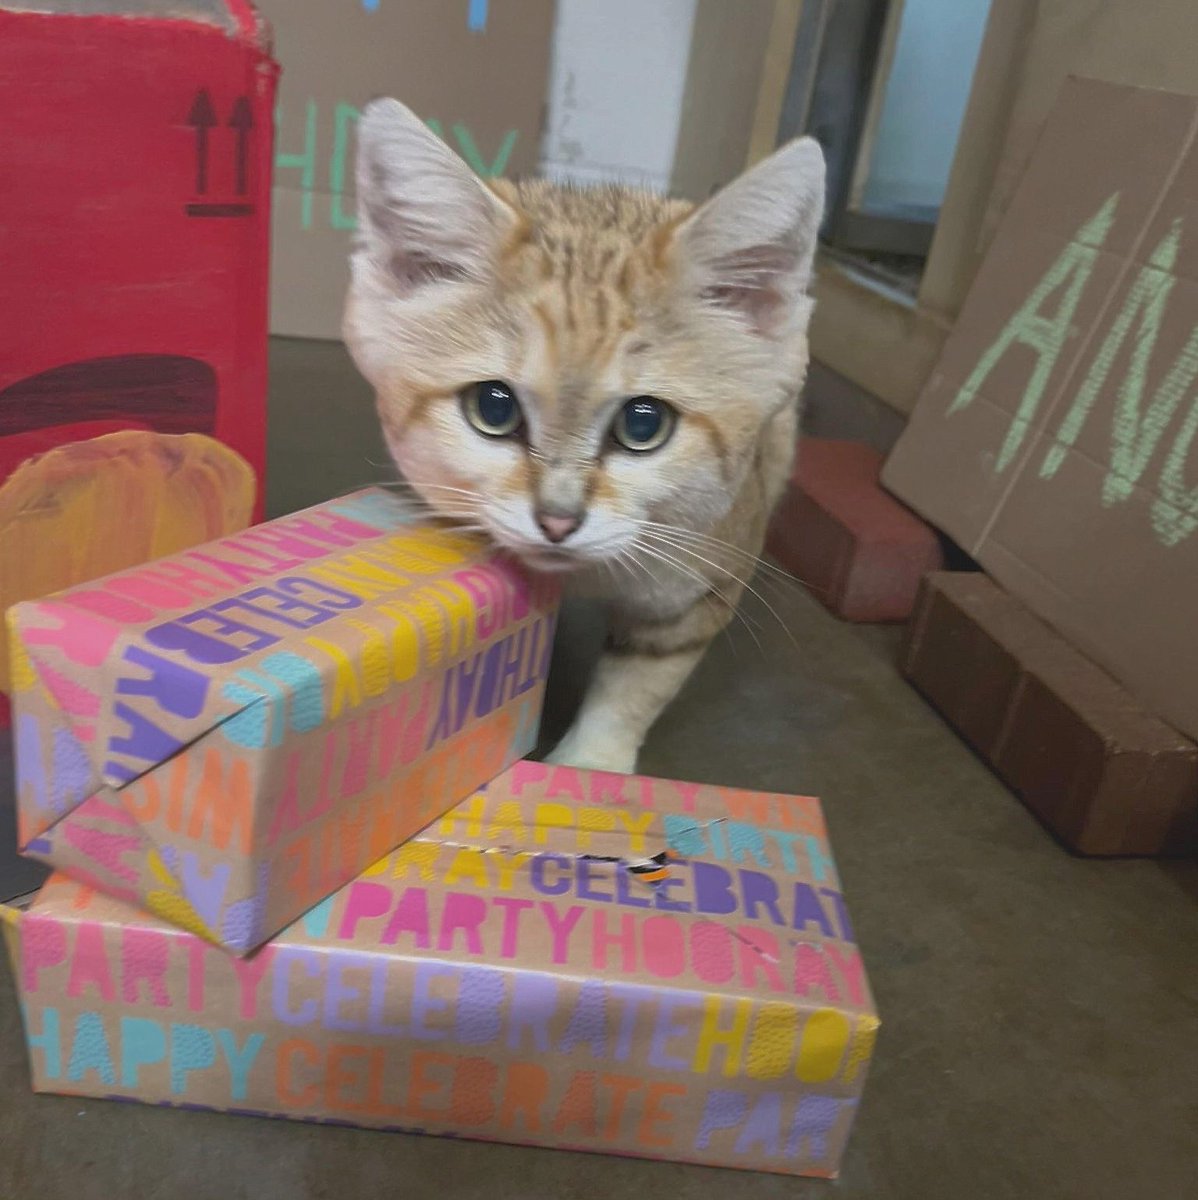 Anubis recently was named the winner of the #SandCatSSP March Madness competition, and now we have another reason to celebrate – it’s his birthday! What’s better than a box for a cat turning 10? A car-shaped box with a license plate that reads, “PRFT10,” of course! 📸 Jillian